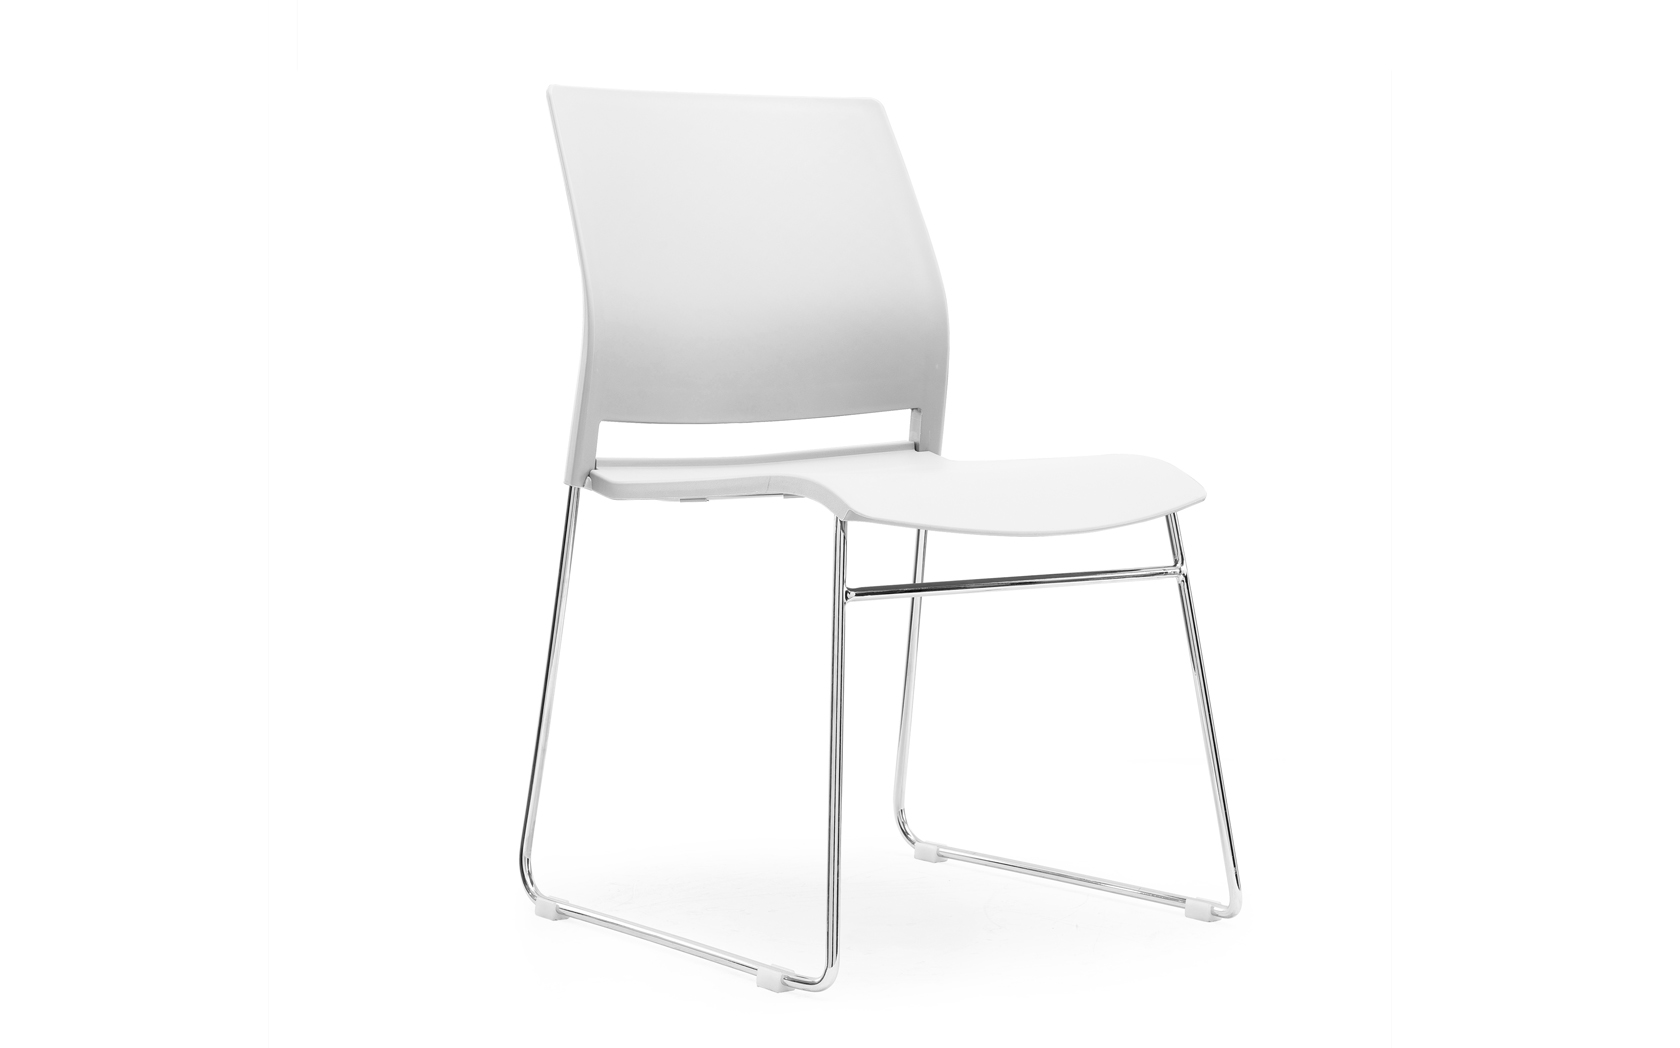 Multi purpose skid frame chair plastic seat and back stacks 10 high White 